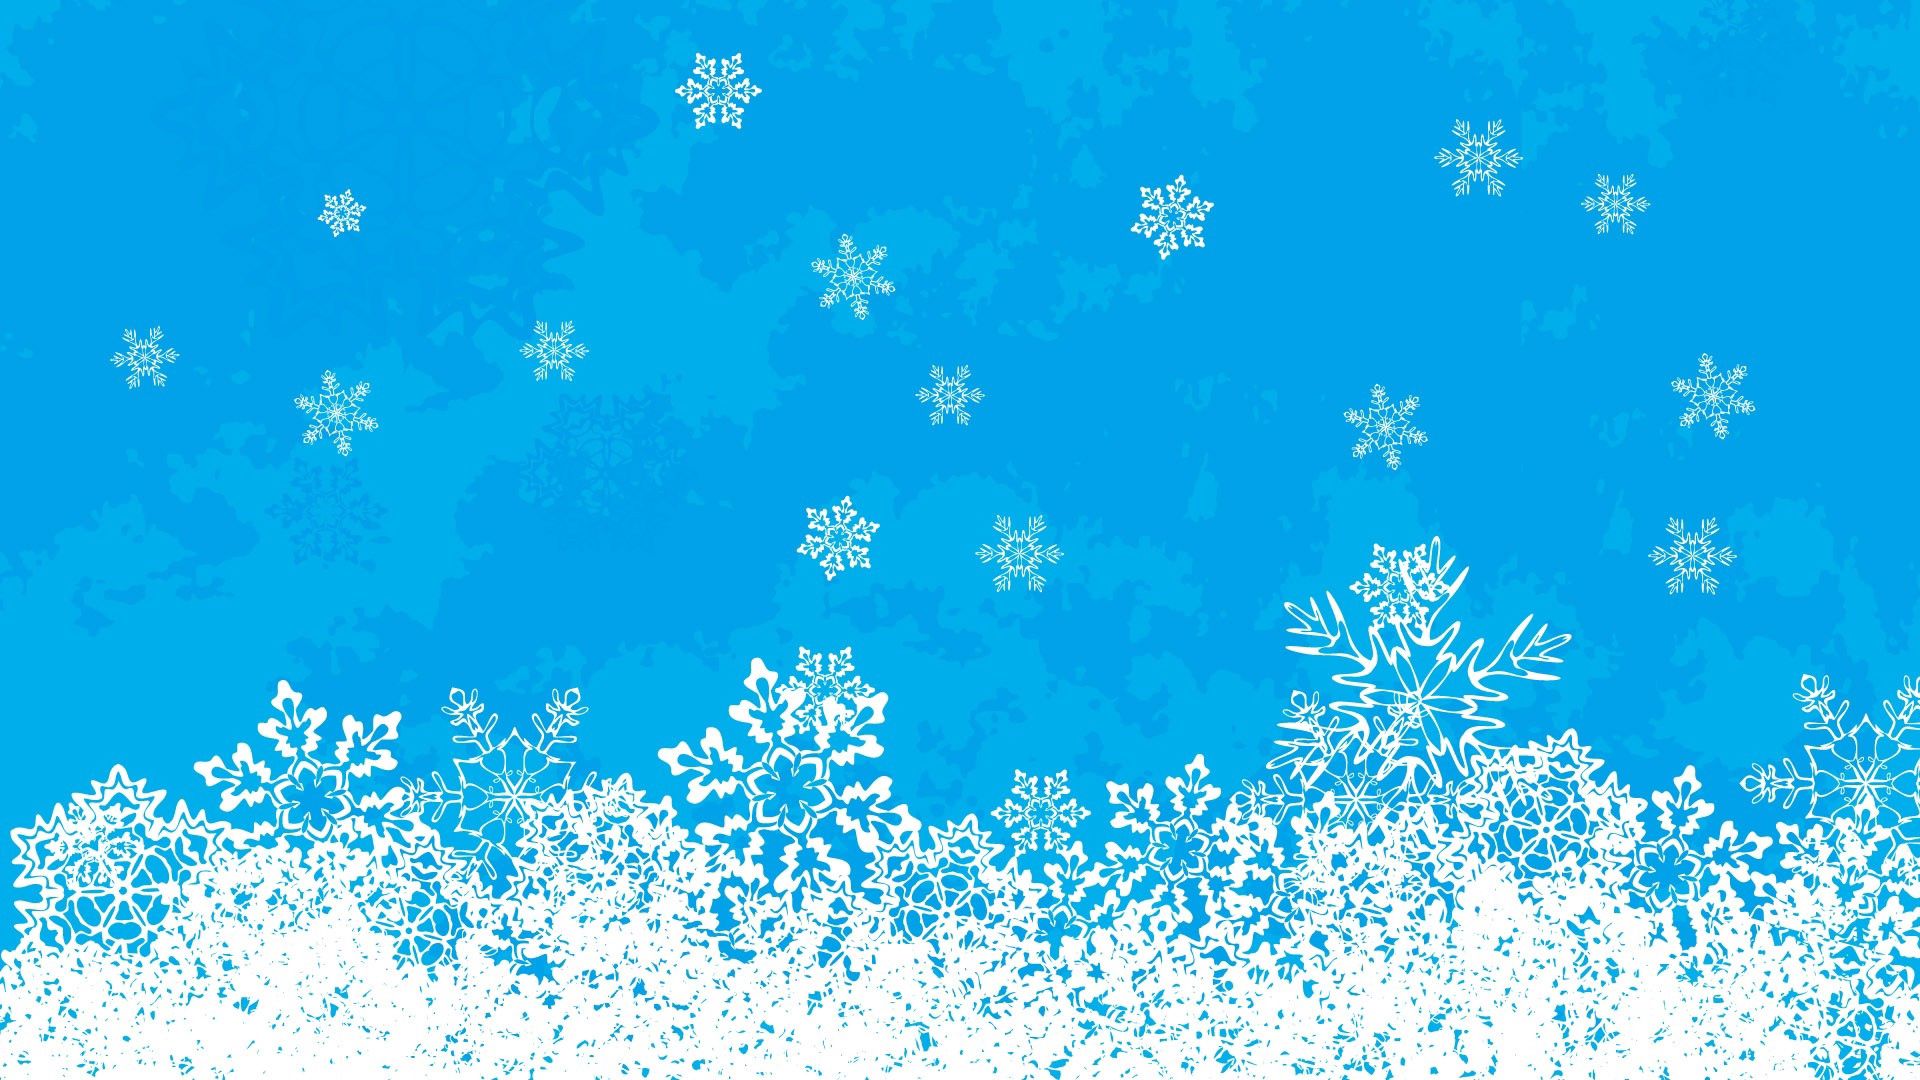 64347 Screensavers and Wallpapers Snowflakes for phone. Download abstract, background, new year, snowflakes, patterns, bright, new year’s pictures for free